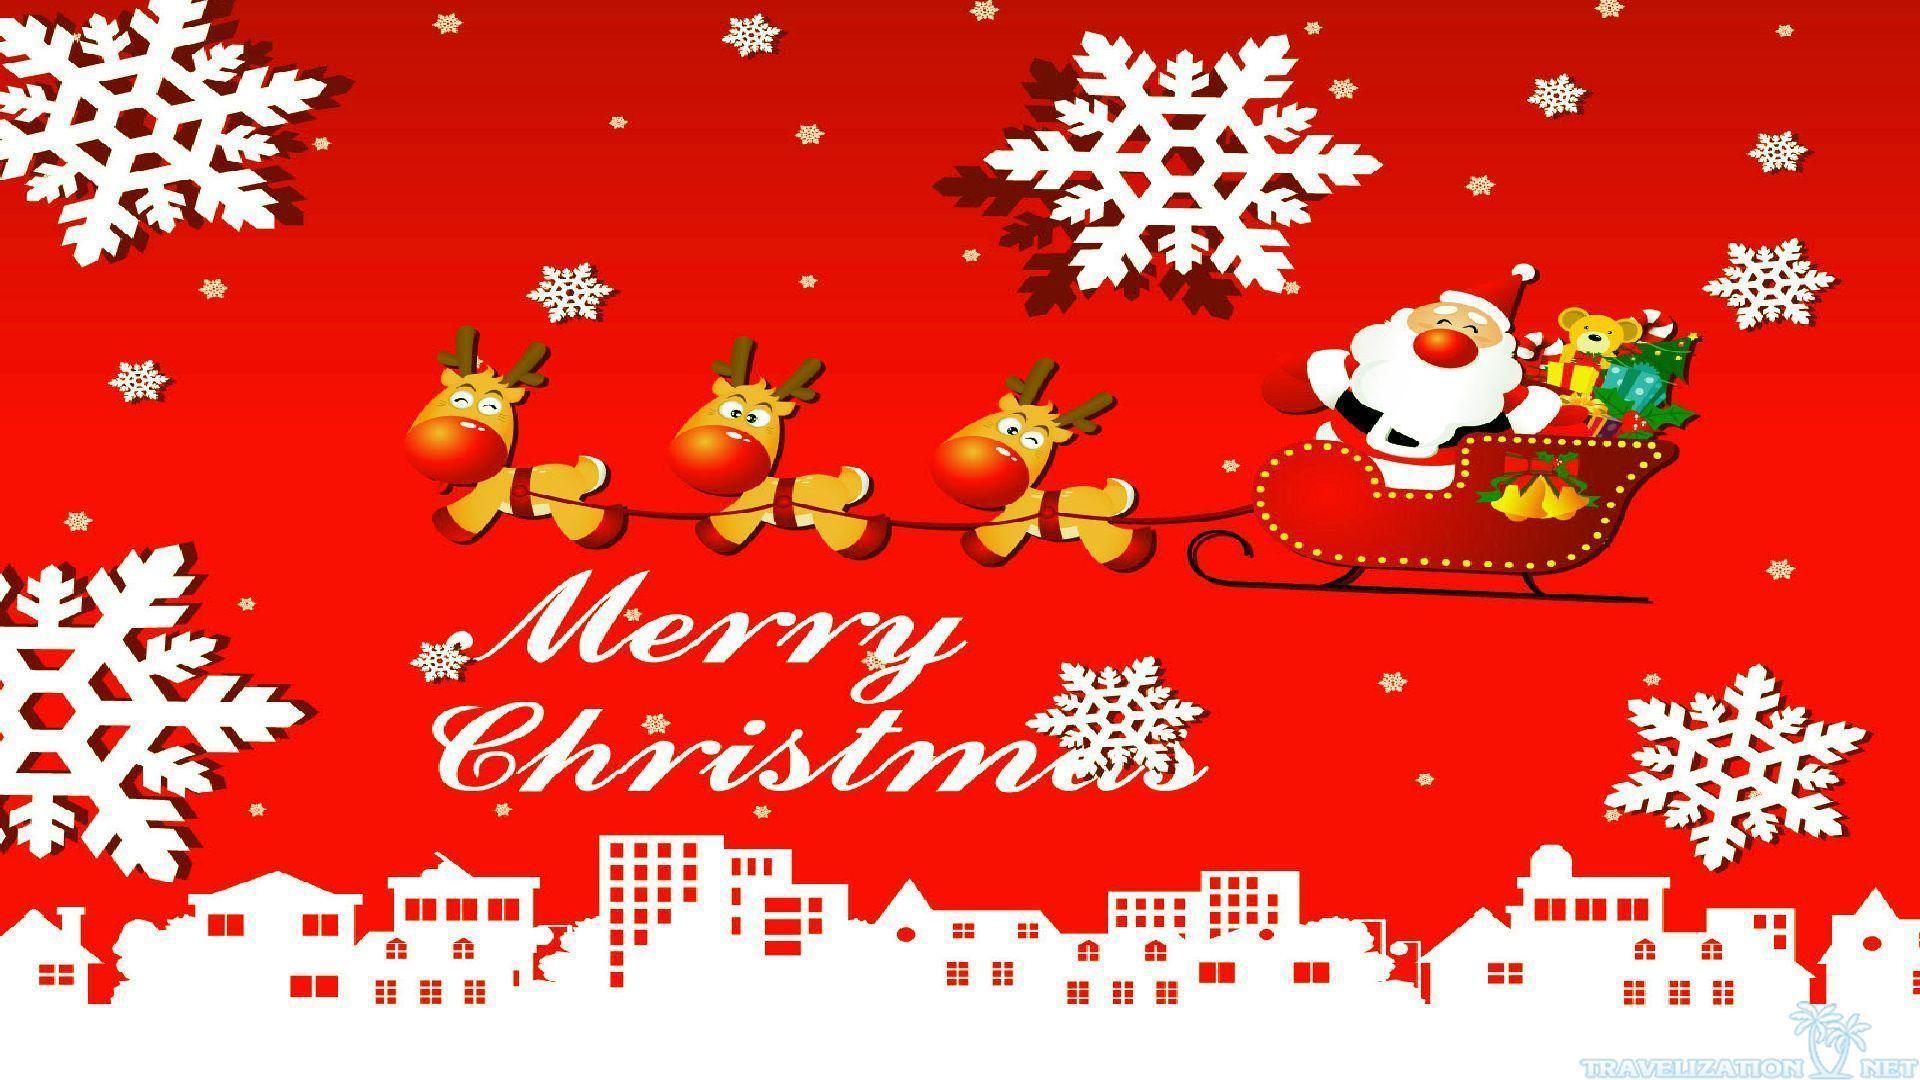 Cute Merry Christmas Image Wallpapers Wallpapers computer